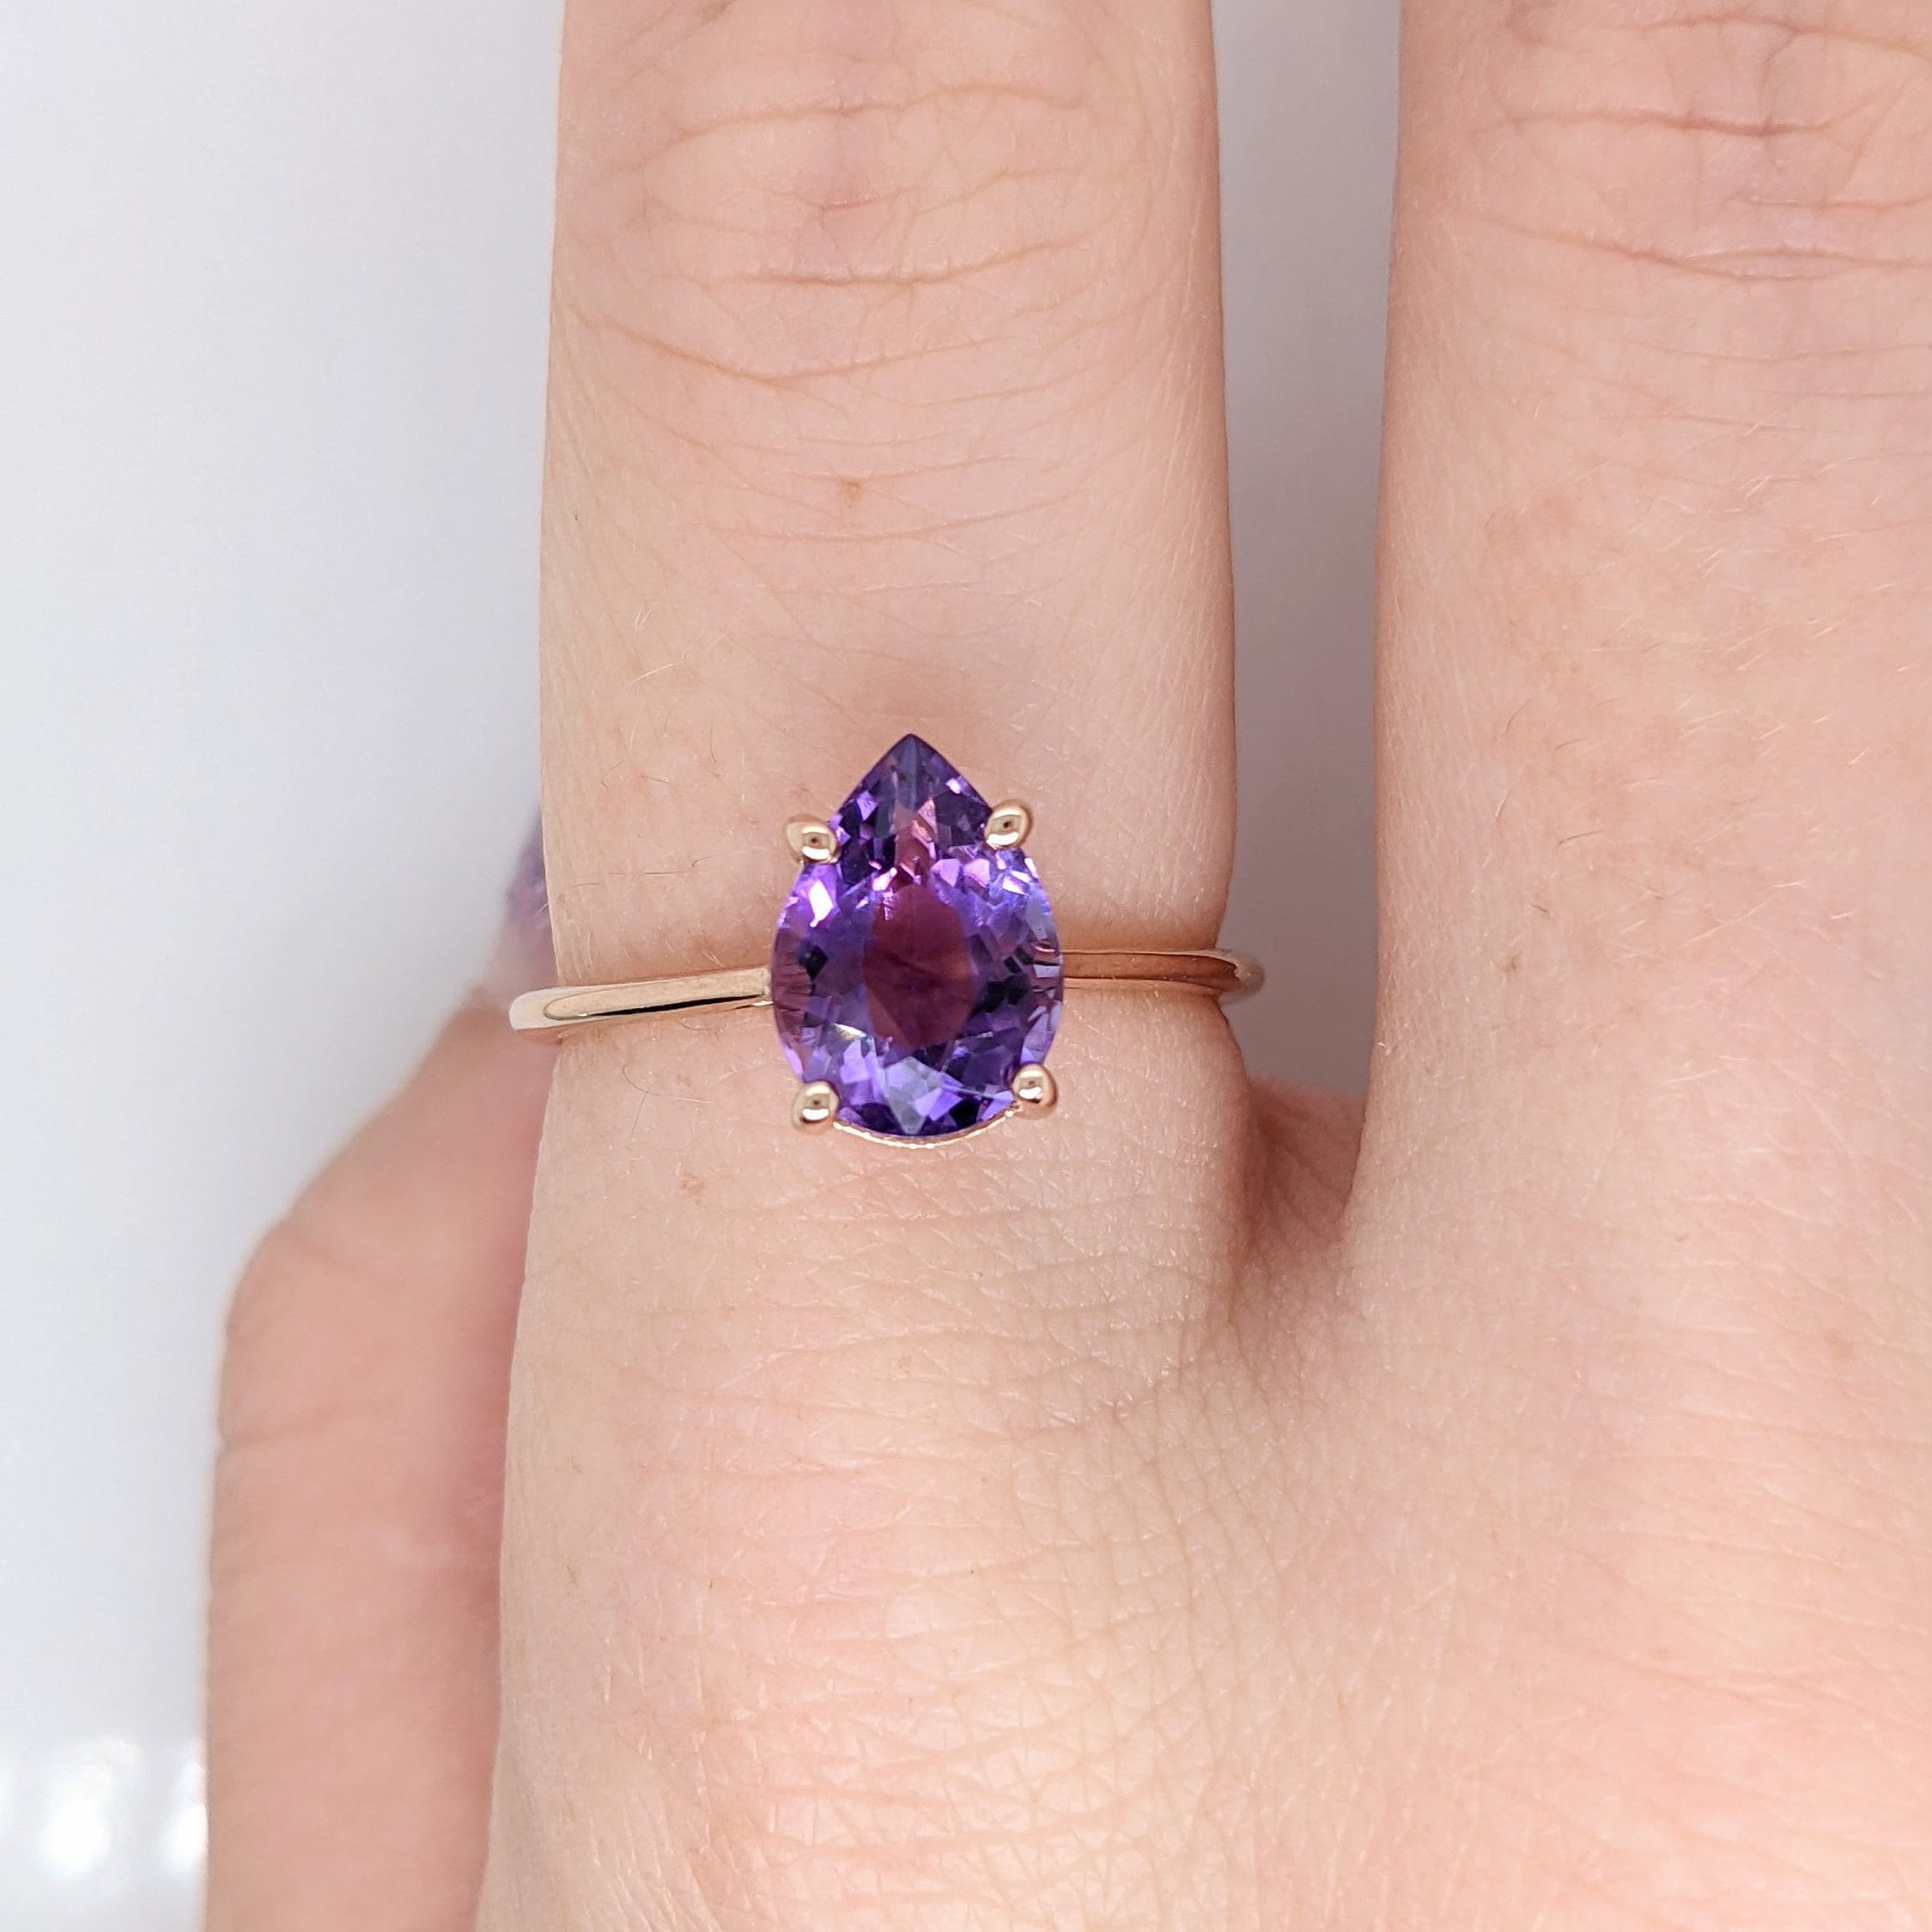 Purple Amethyst in a Solid 14k Rose Gold Solitaire Setting | Pear Shape 10x7mm | February Birthstone | Ready to Ship Gemstone Jewelry